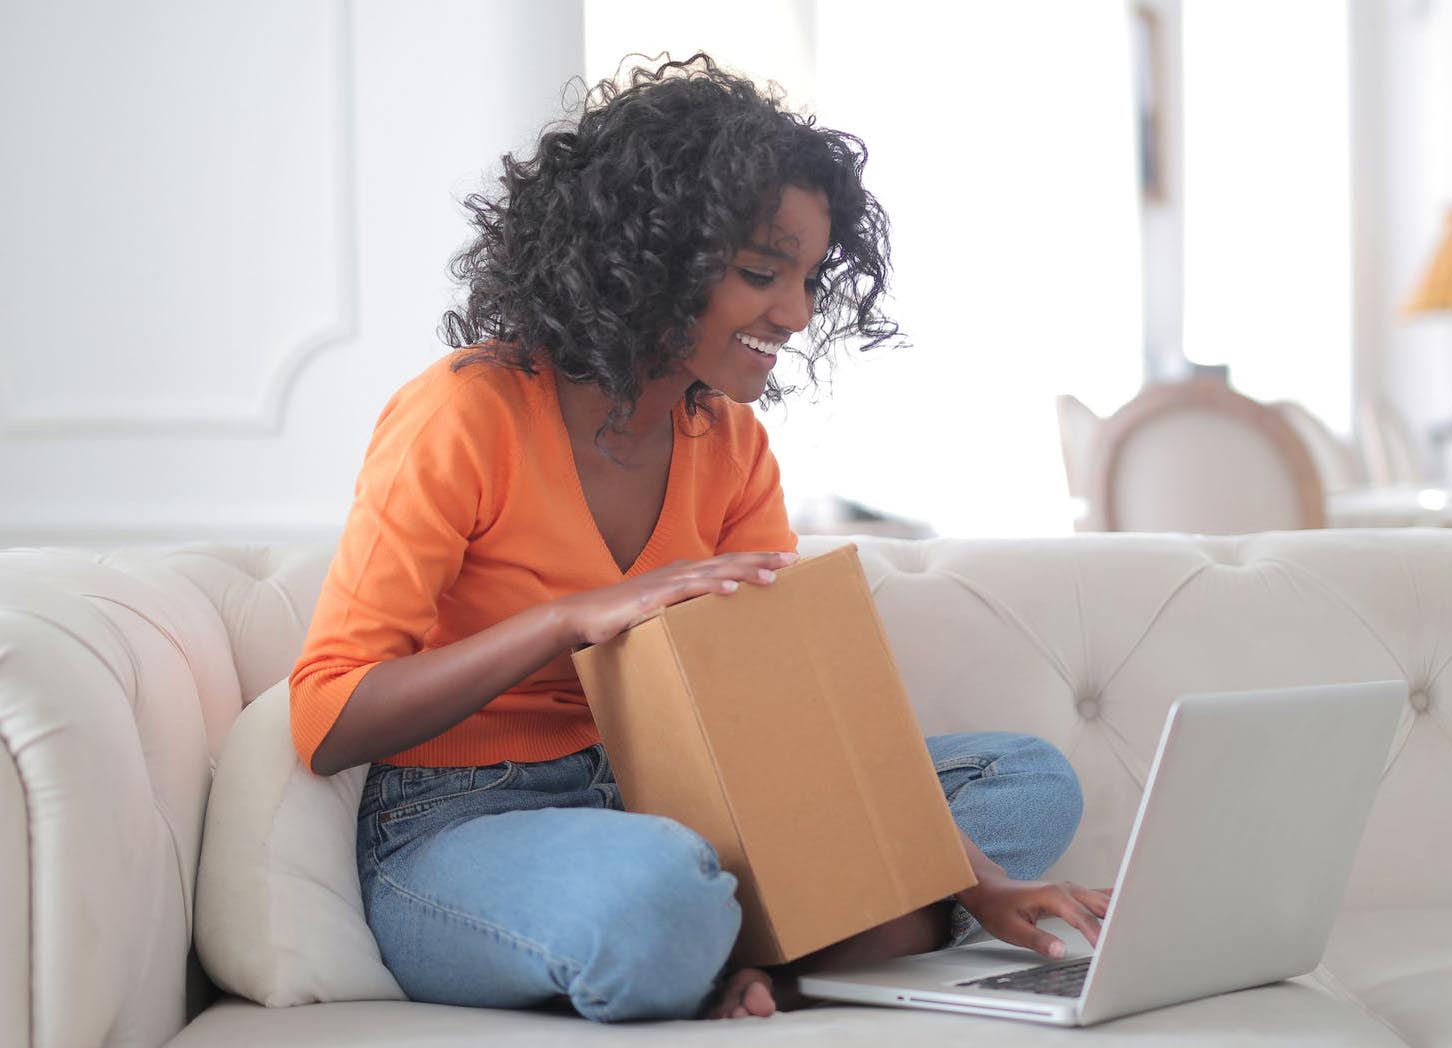 Black woman smiling with a cardboard box in her lap as she types on a laptop